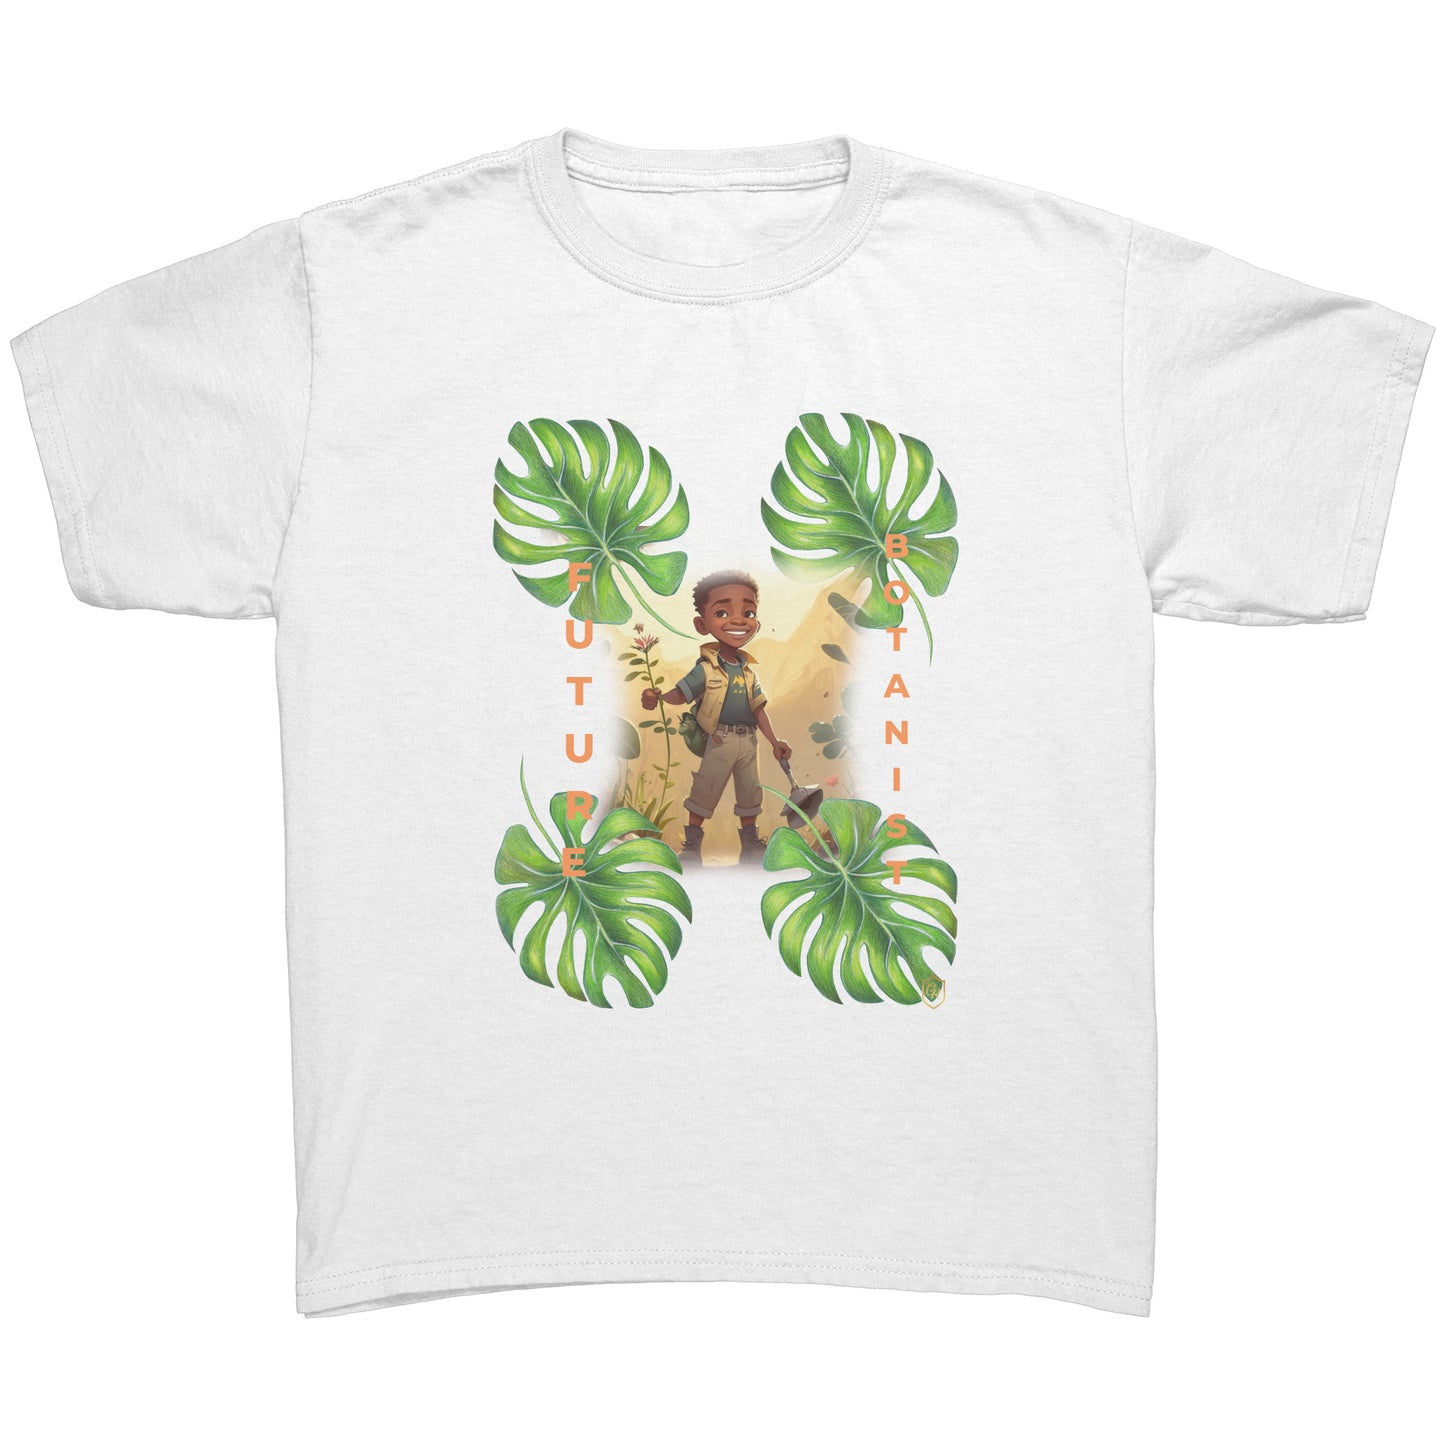 Young Boy's Botanist of the Future T-shirt